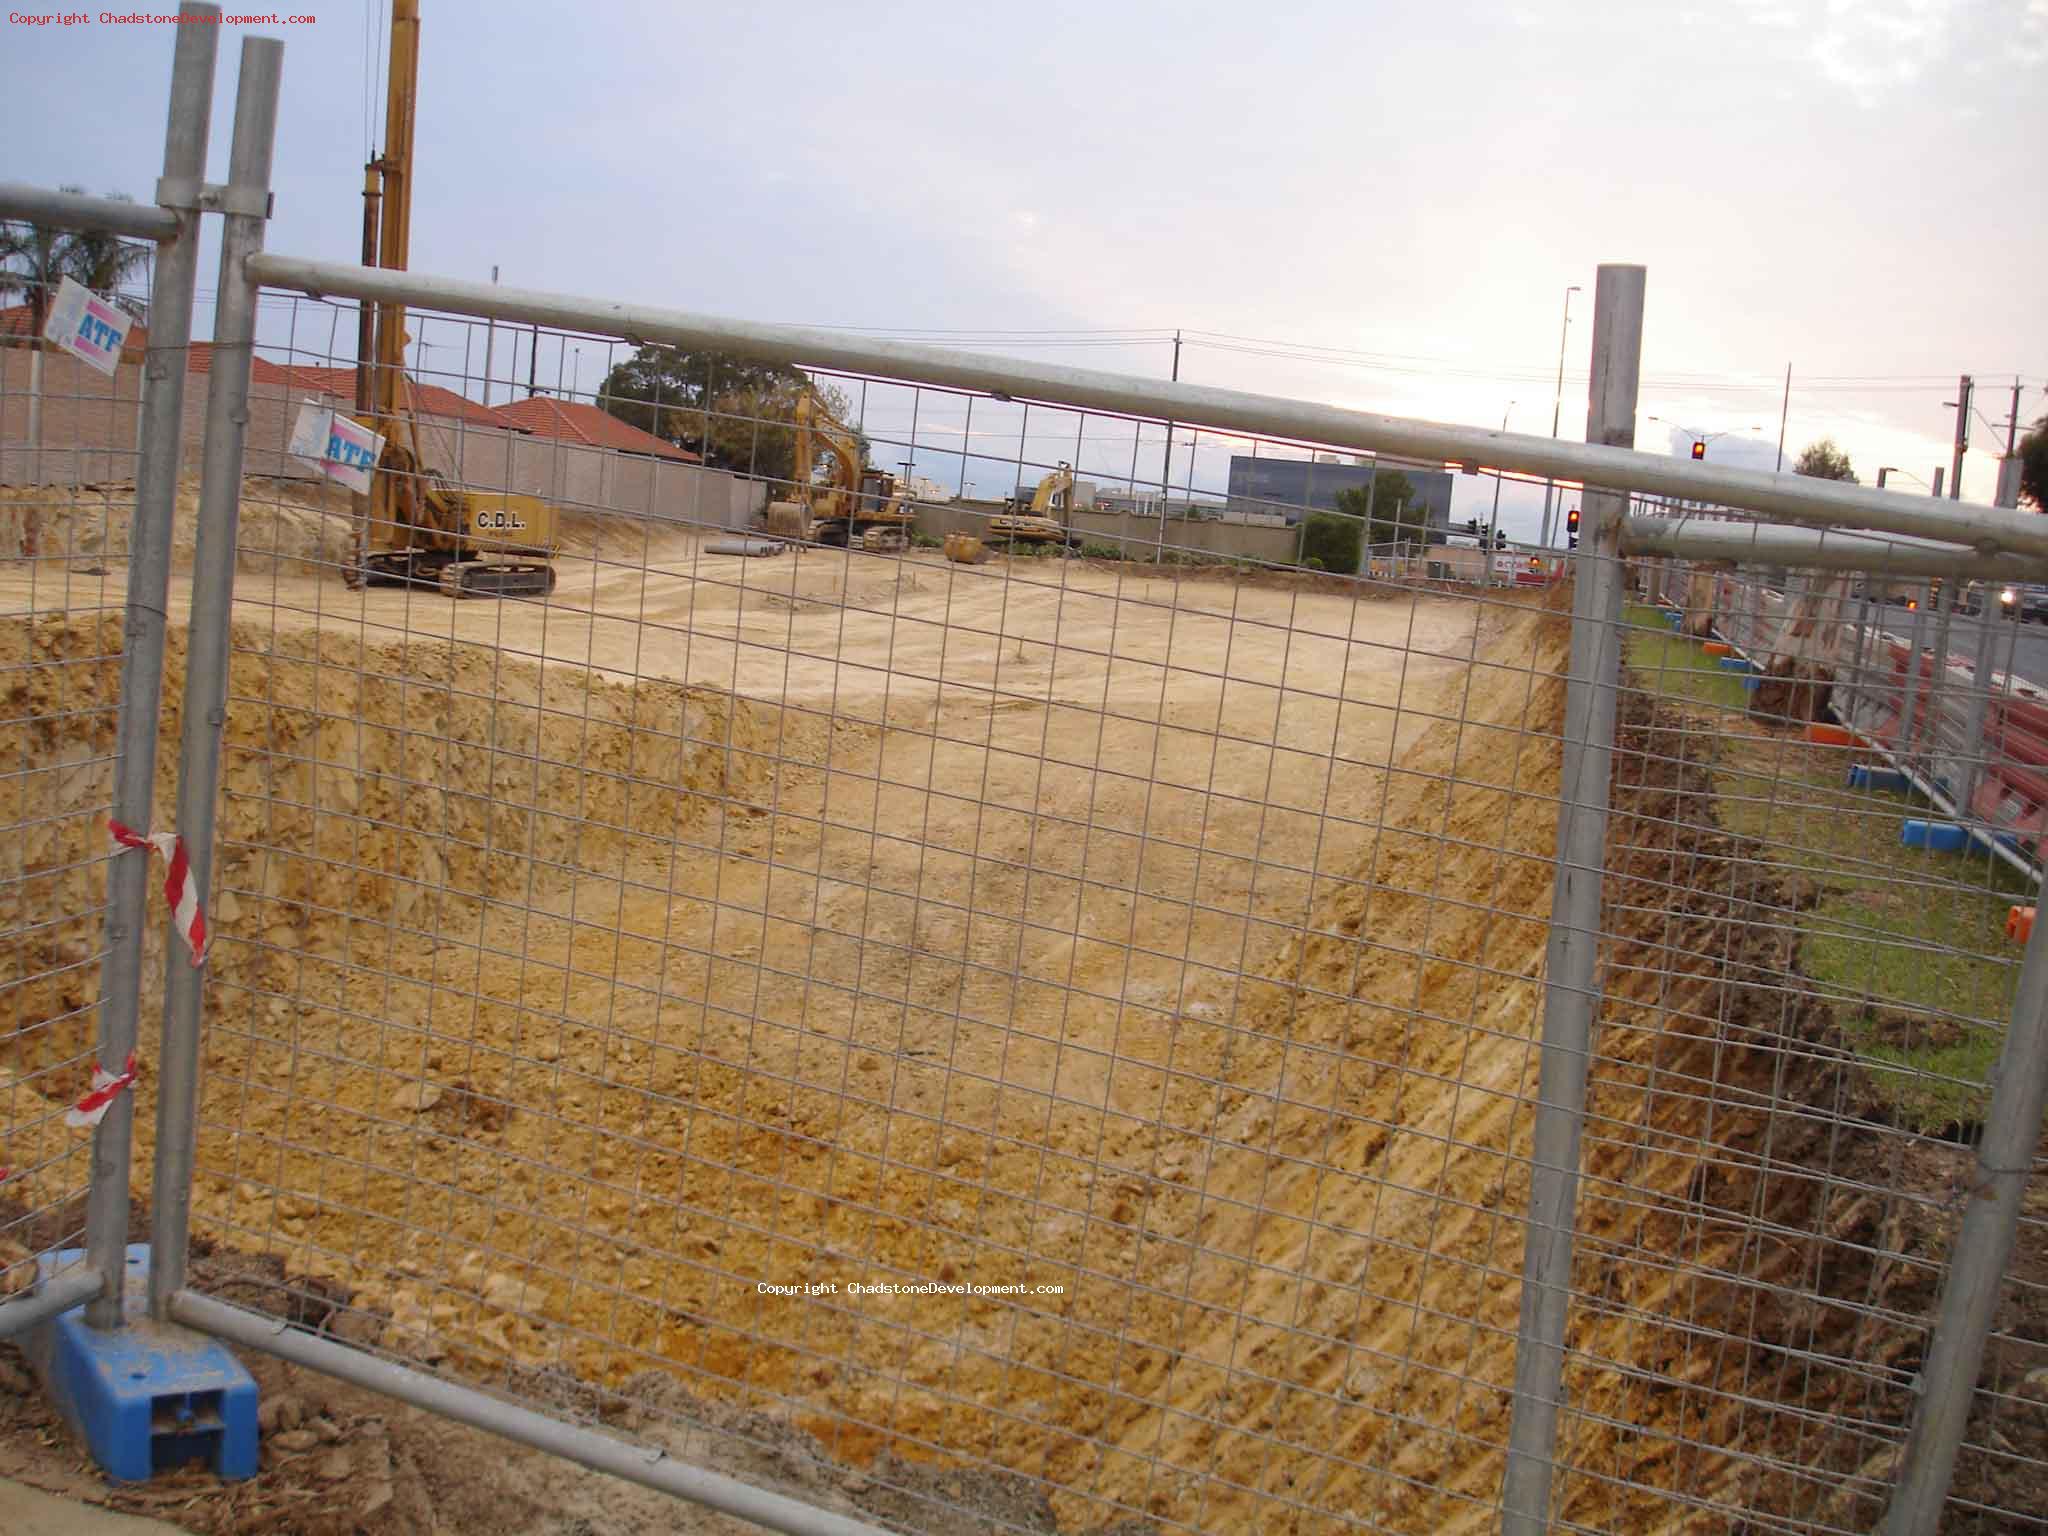 Closeup of wire fence at excavations - Chadstone Development Discussions